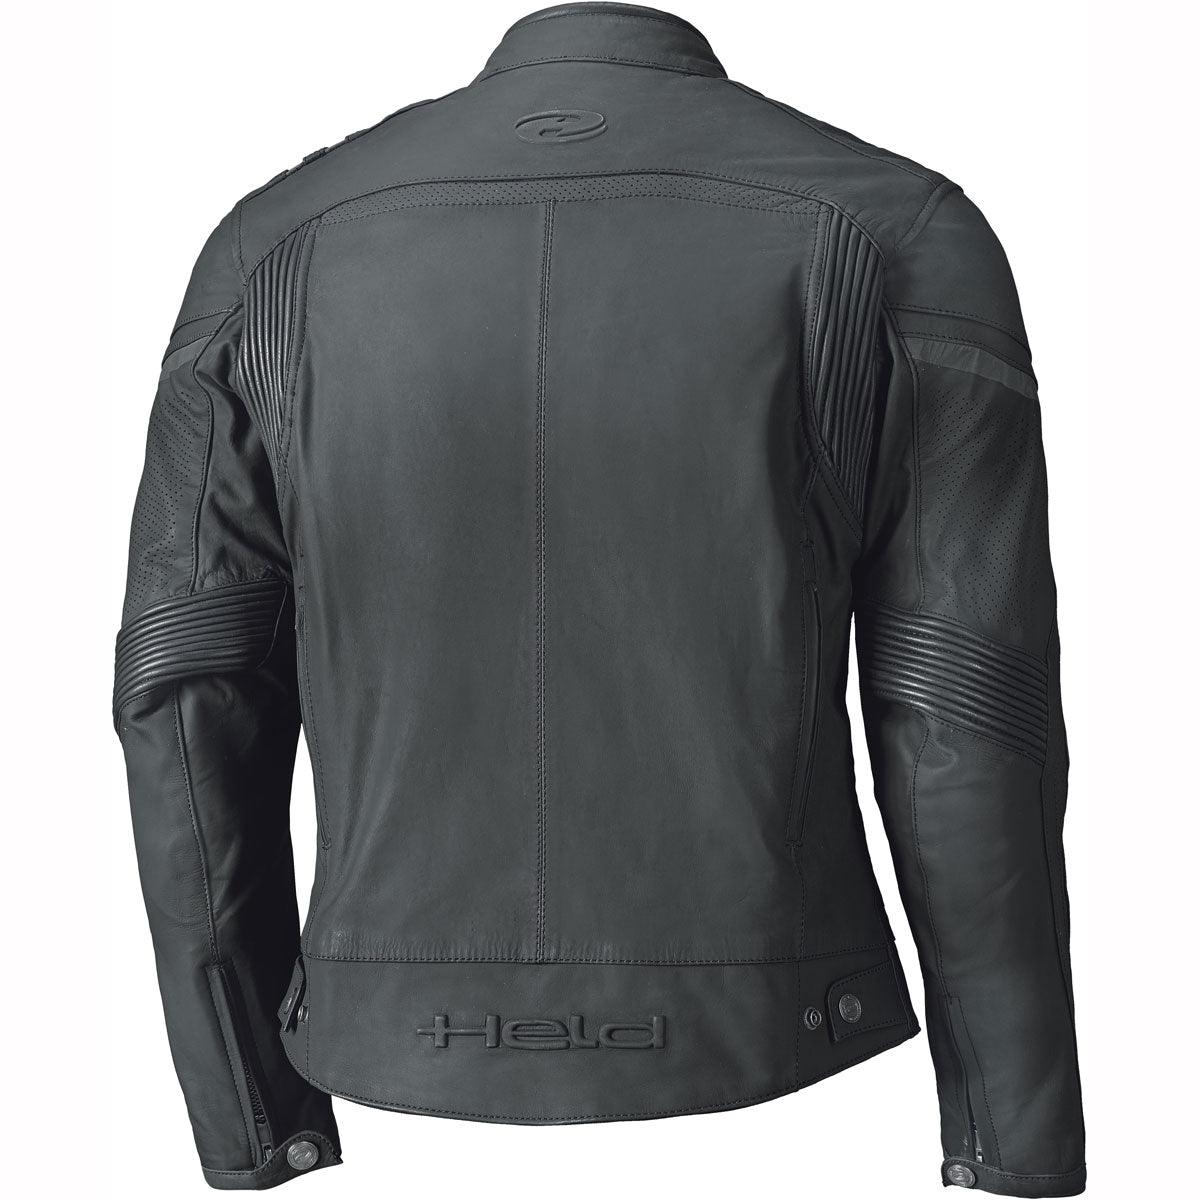 Held 5733 Cosmo 3.0 Leather Jacket Mens TFL Black - Motorcycle Leathers